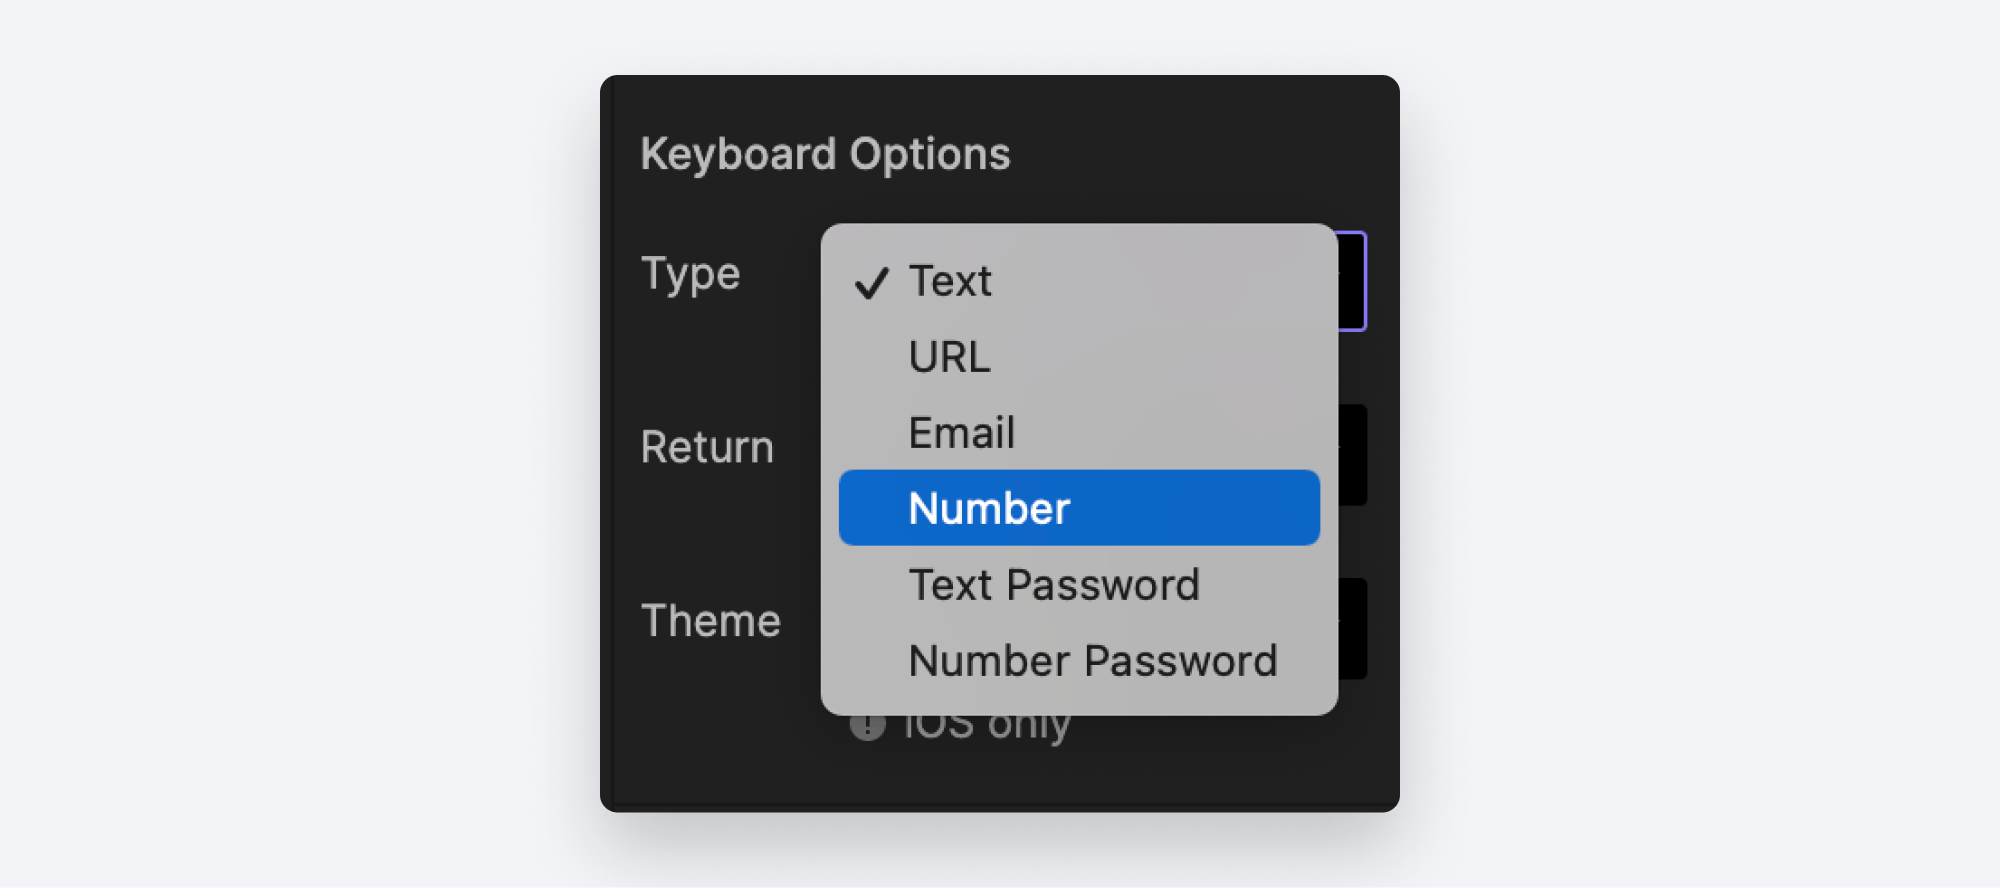 Change the keyboard option to number